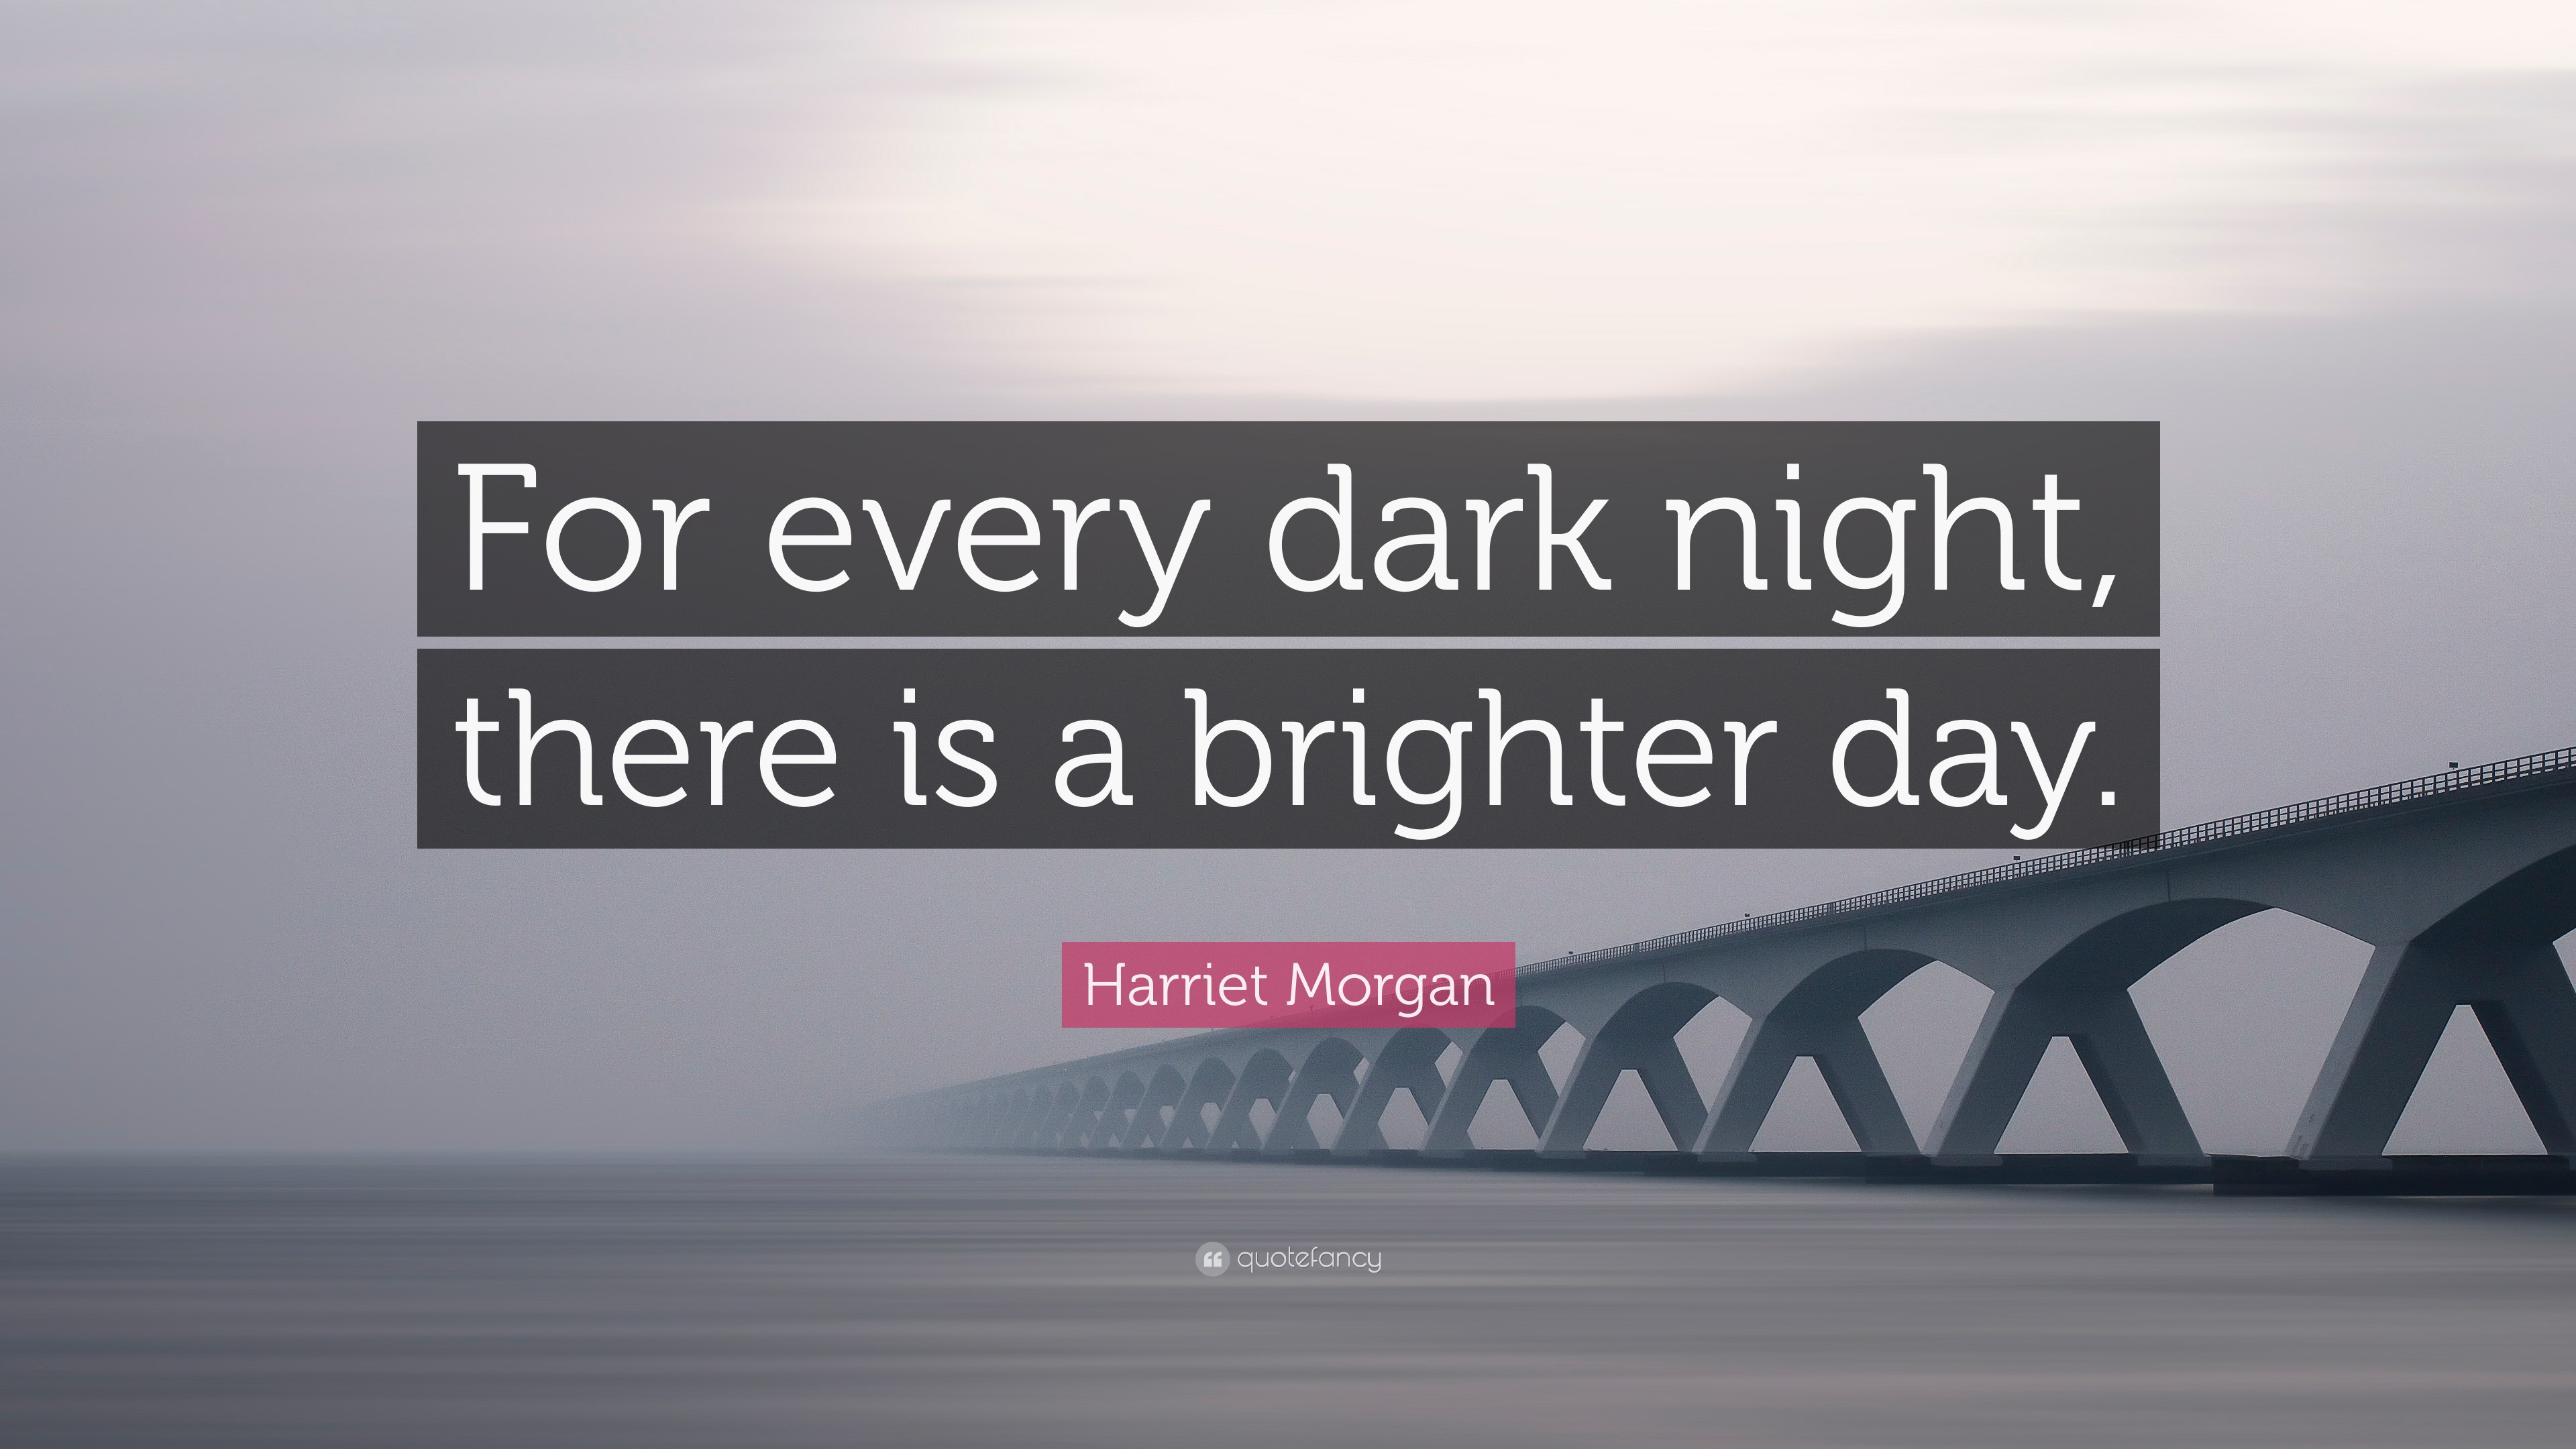 Harriet Morgan Quote: “For every dark night, there is a brighter day.”